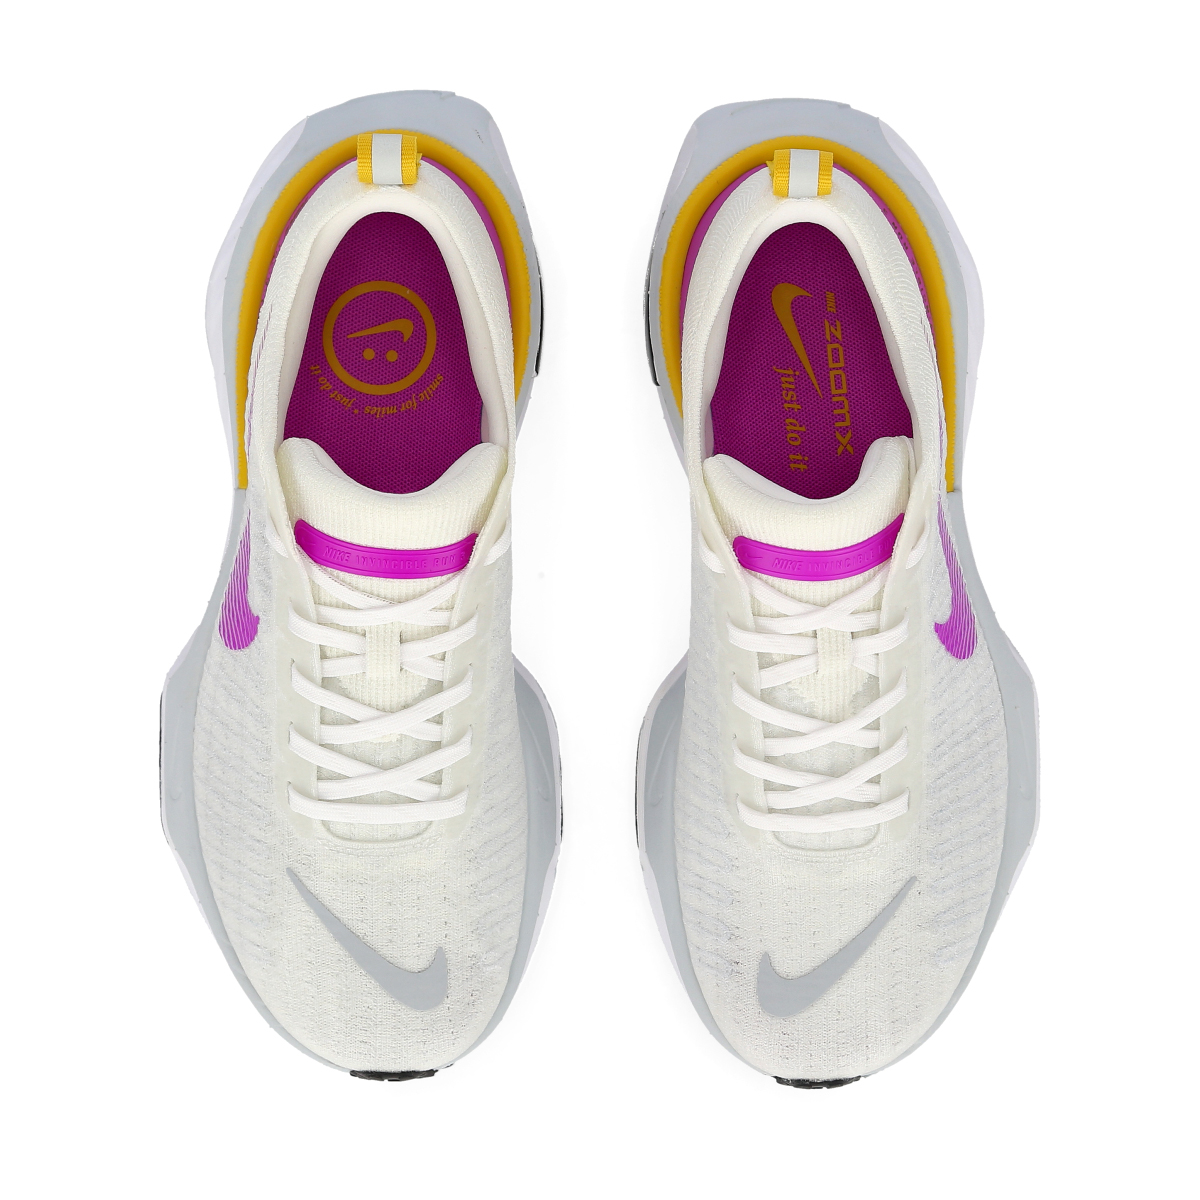 Zapatillas Running Nike Invincible 3 Mujer,  image number null